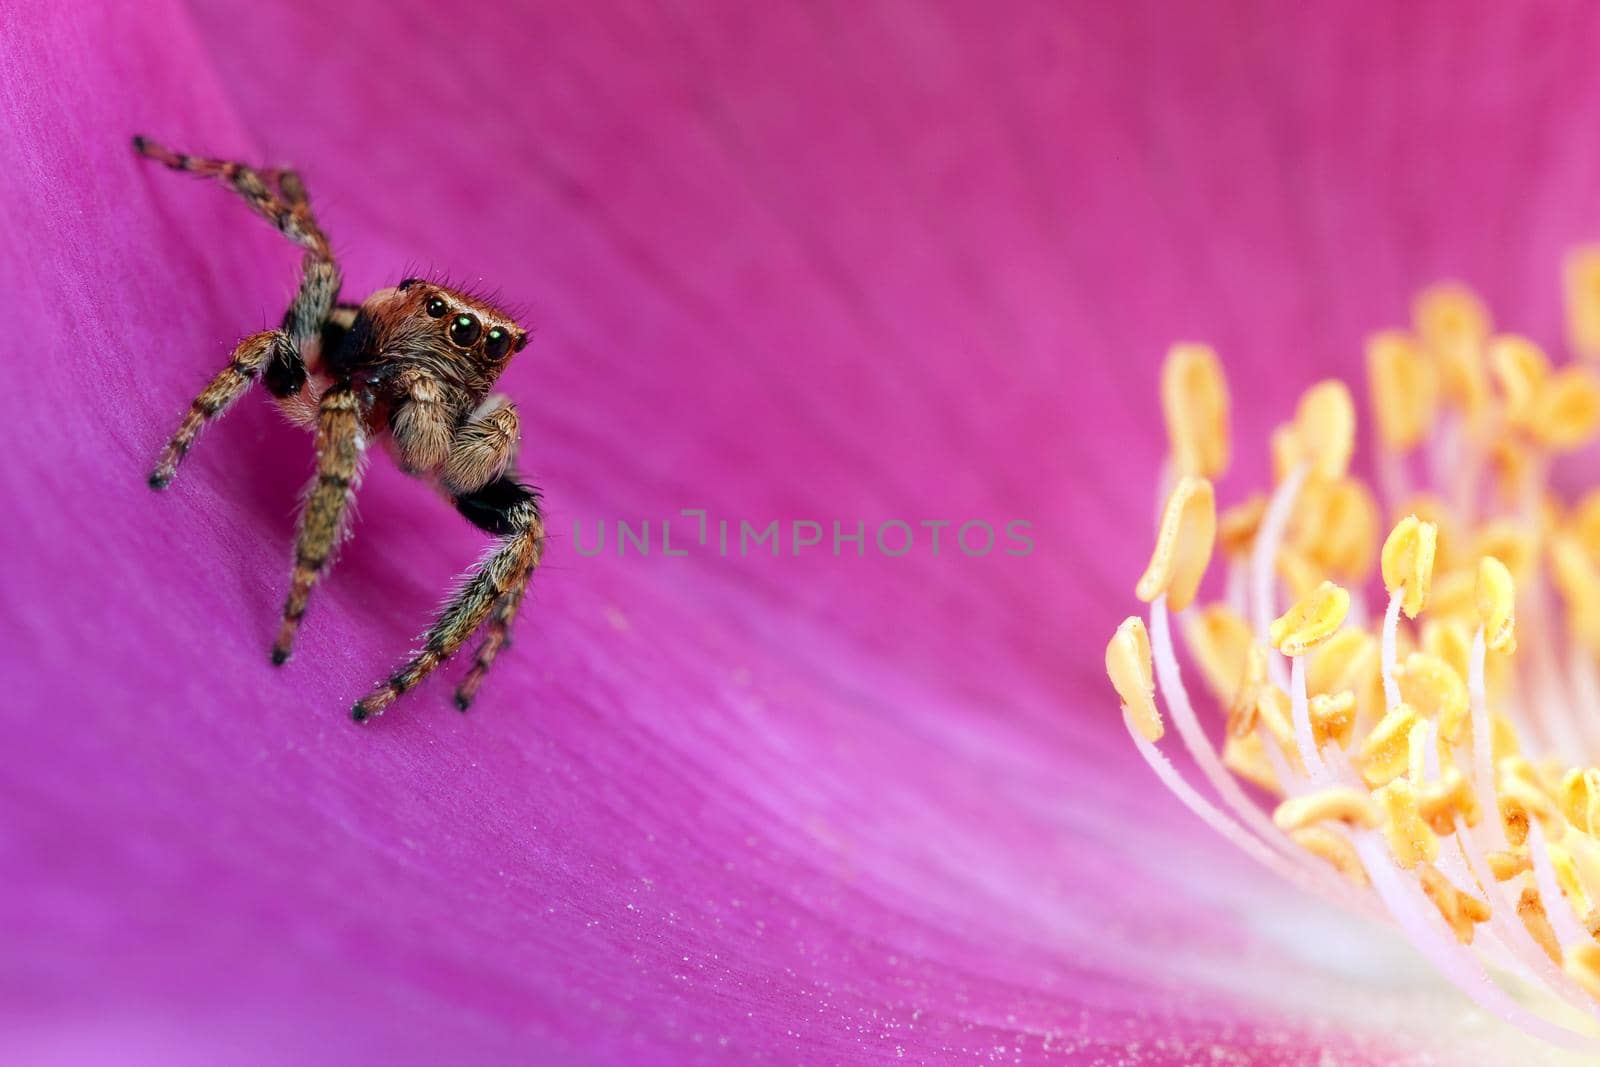 Jumping spider jumping in the pink flower blossom with yellow stamens
